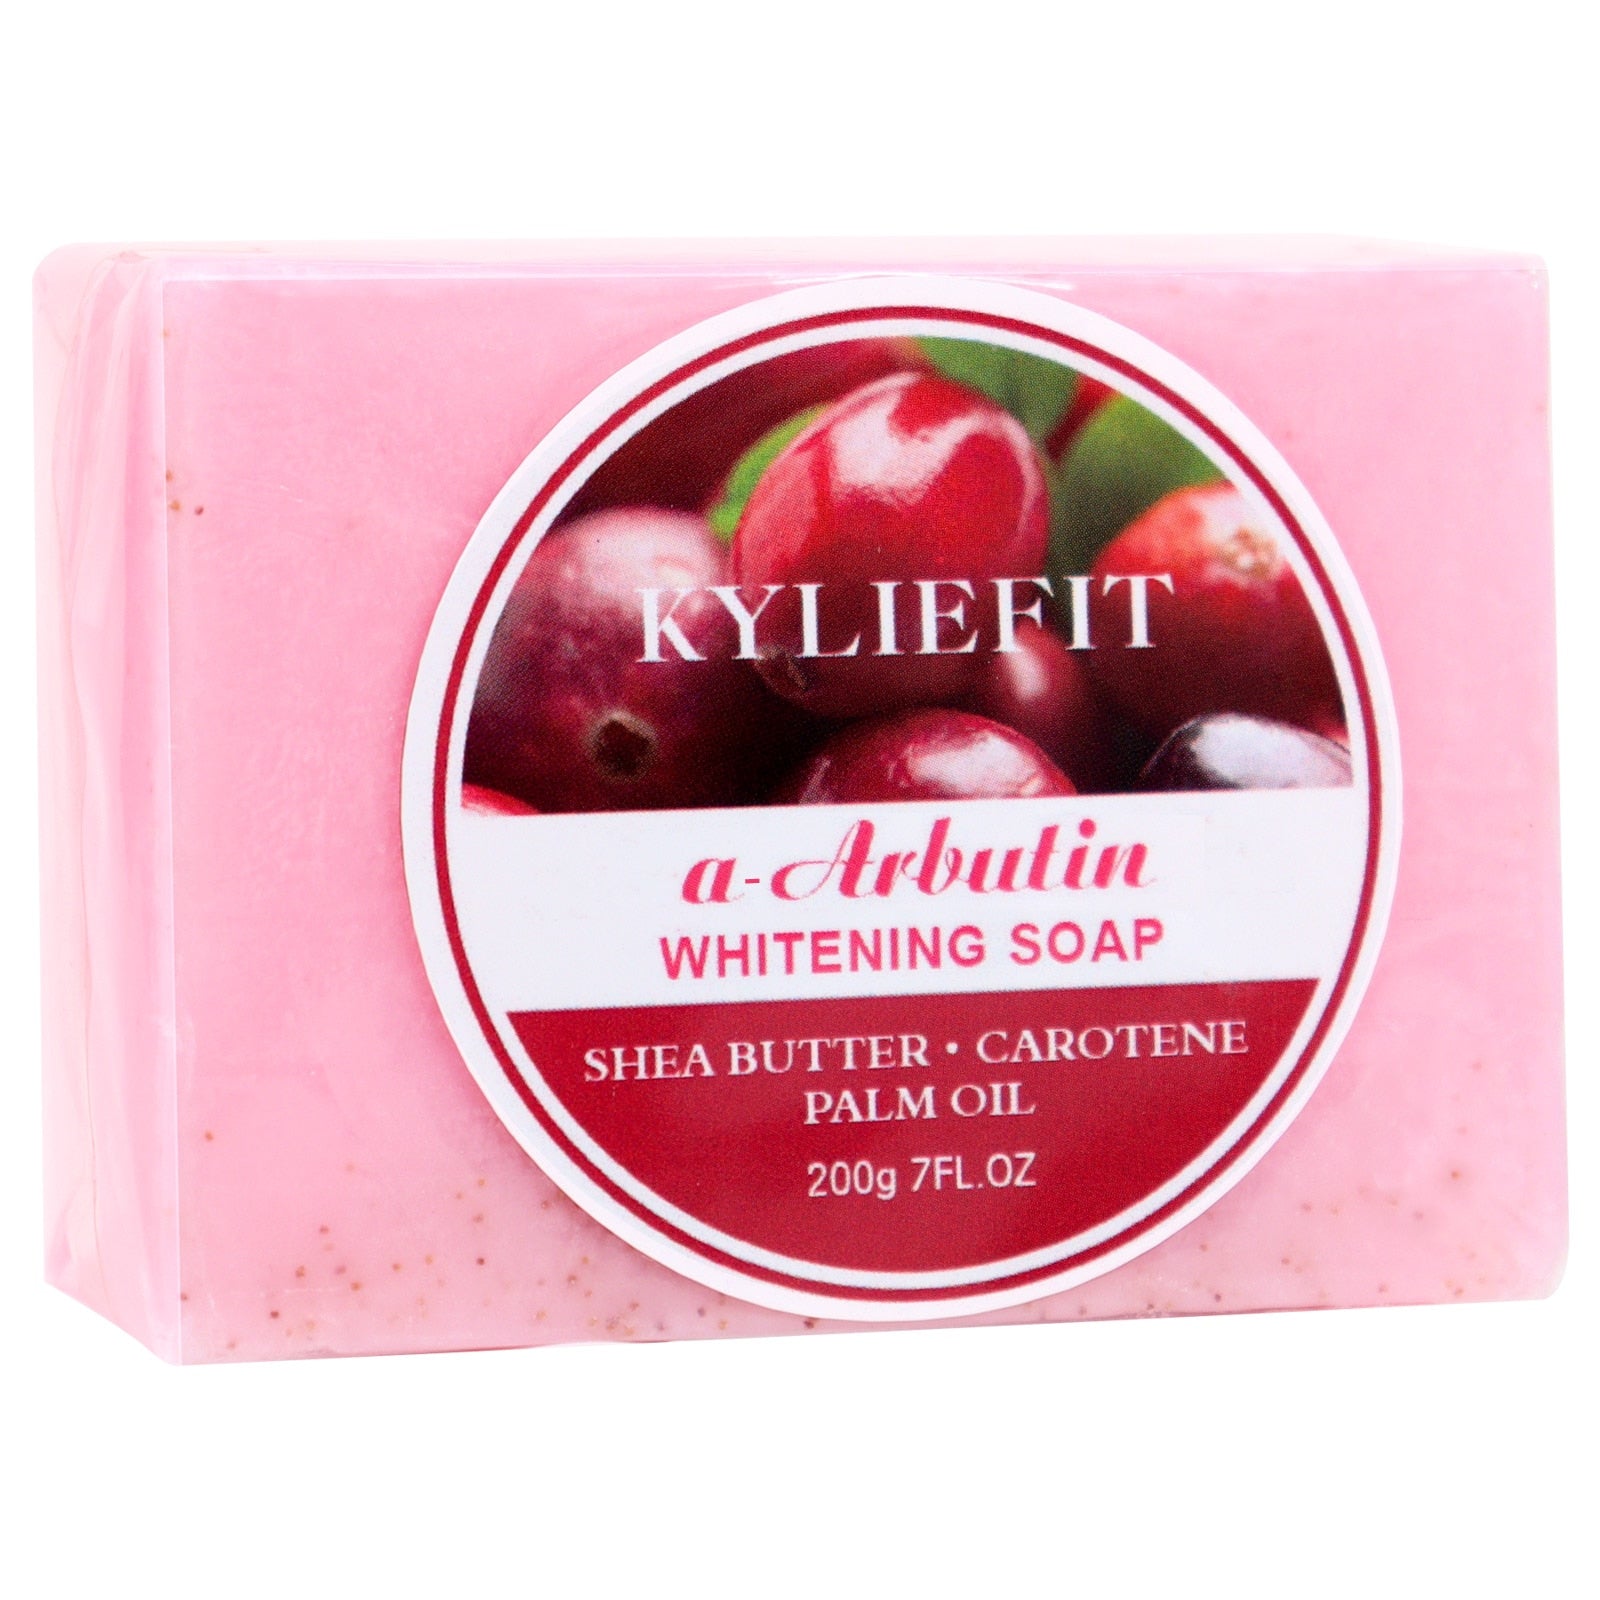 A-Arbutin Whitening Soap with Shea Butter Carotene and Palm Oil